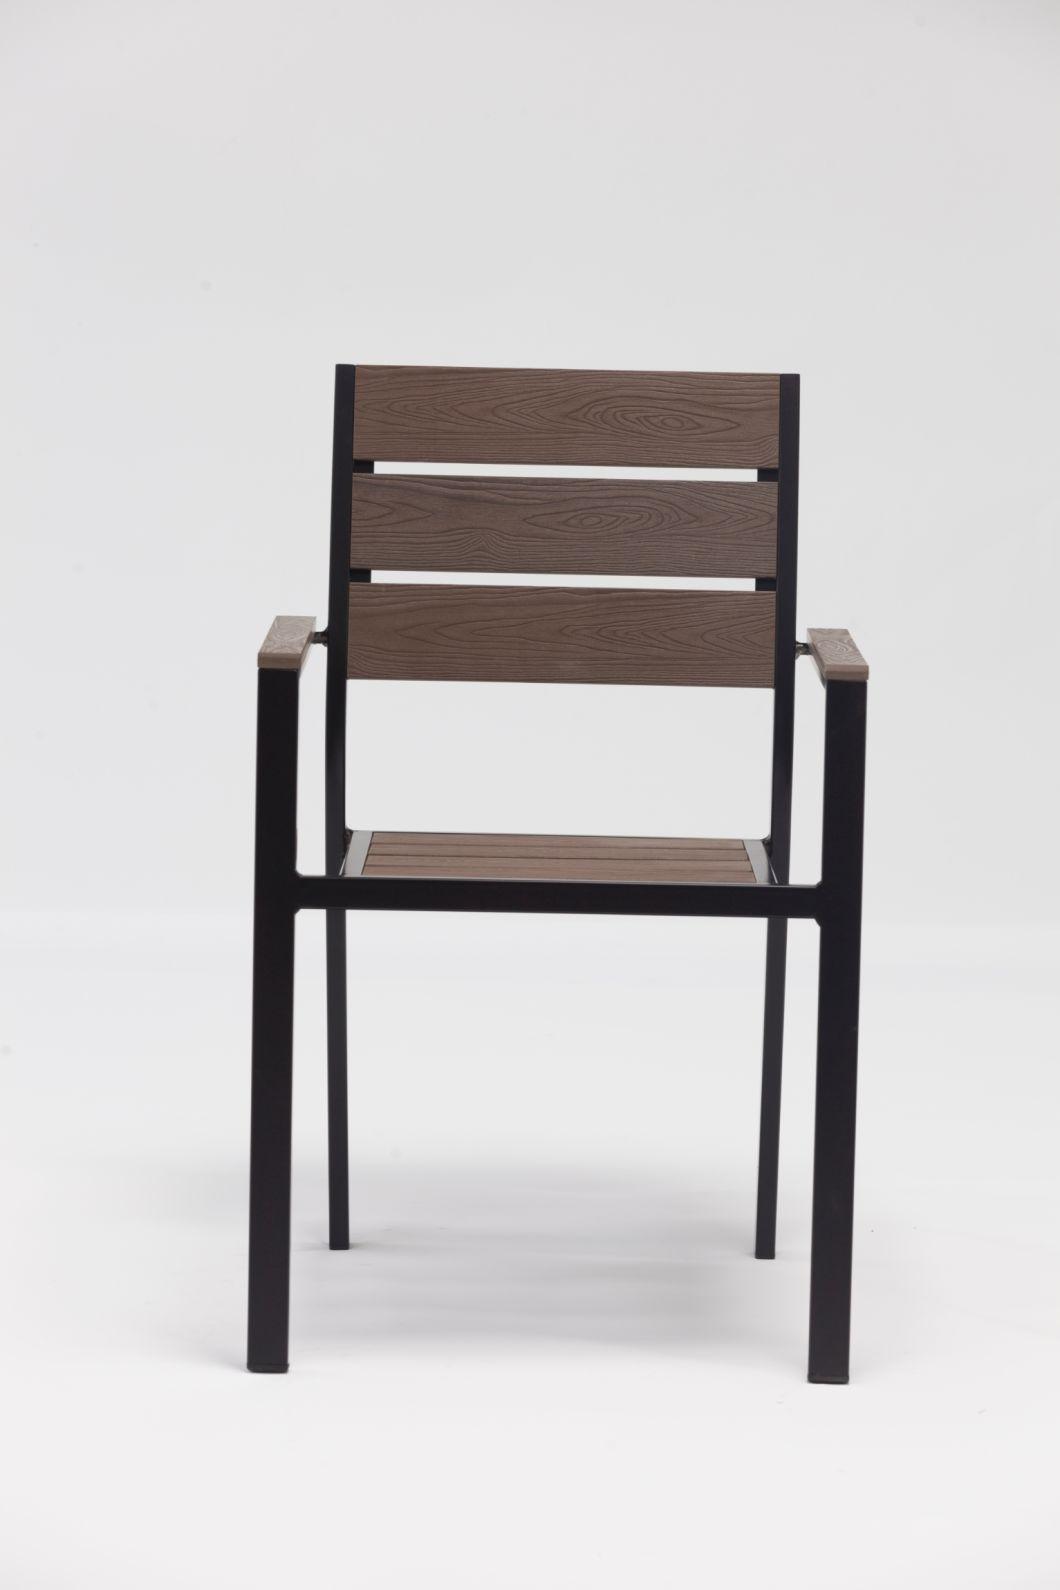 Stackable Polywood Aluminum Chair for Outdoor